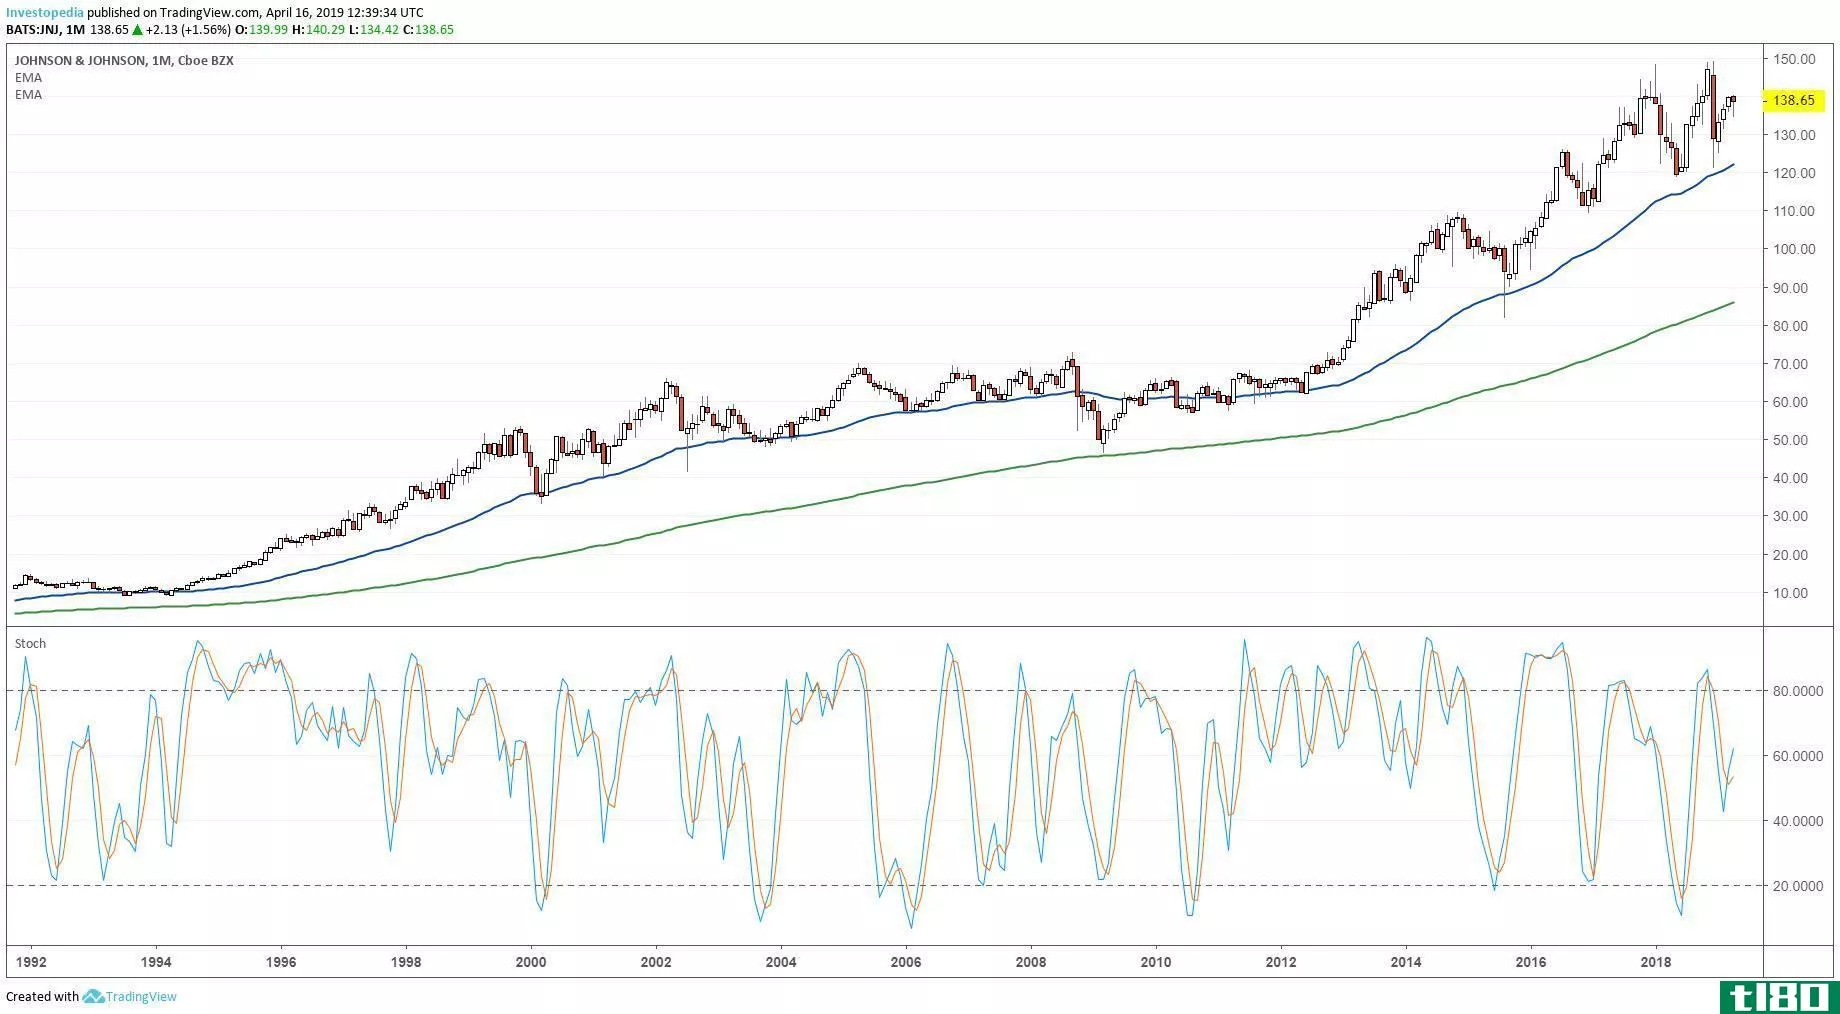 Long-term technical chart showing the share price performance of Johnson & Johnson (JNJ)